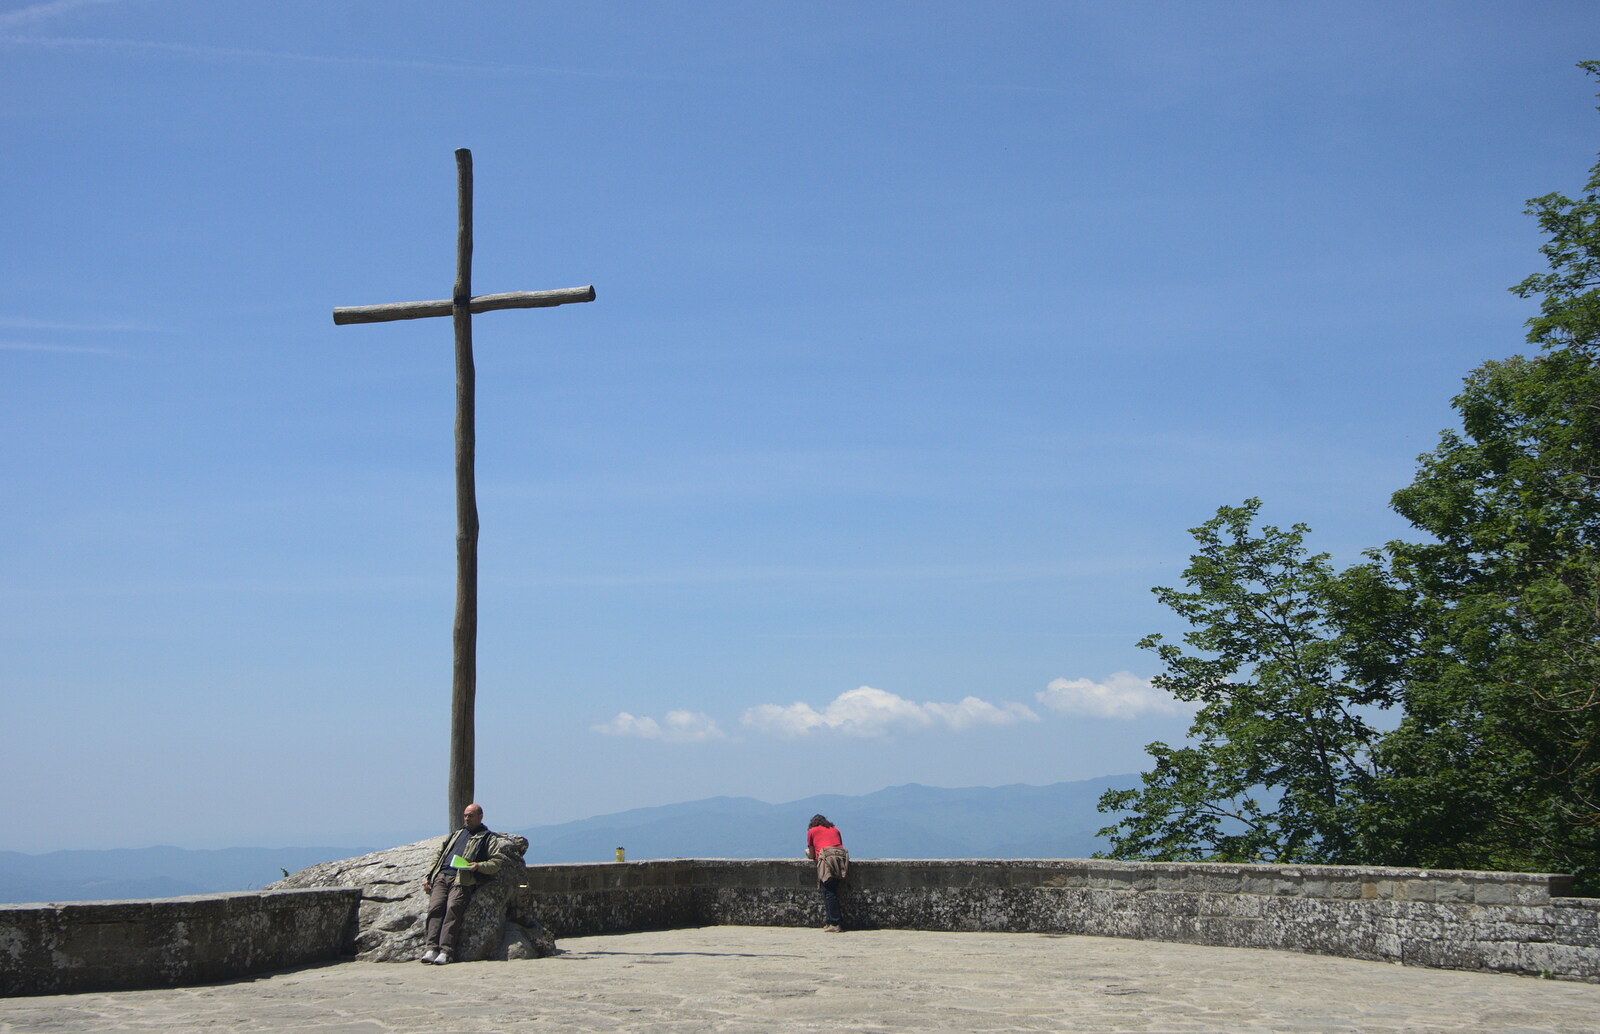 A wooden cross on the hill from La Verna Monastery and the Fireflies of Tuscany, Italy - 14th June 2013